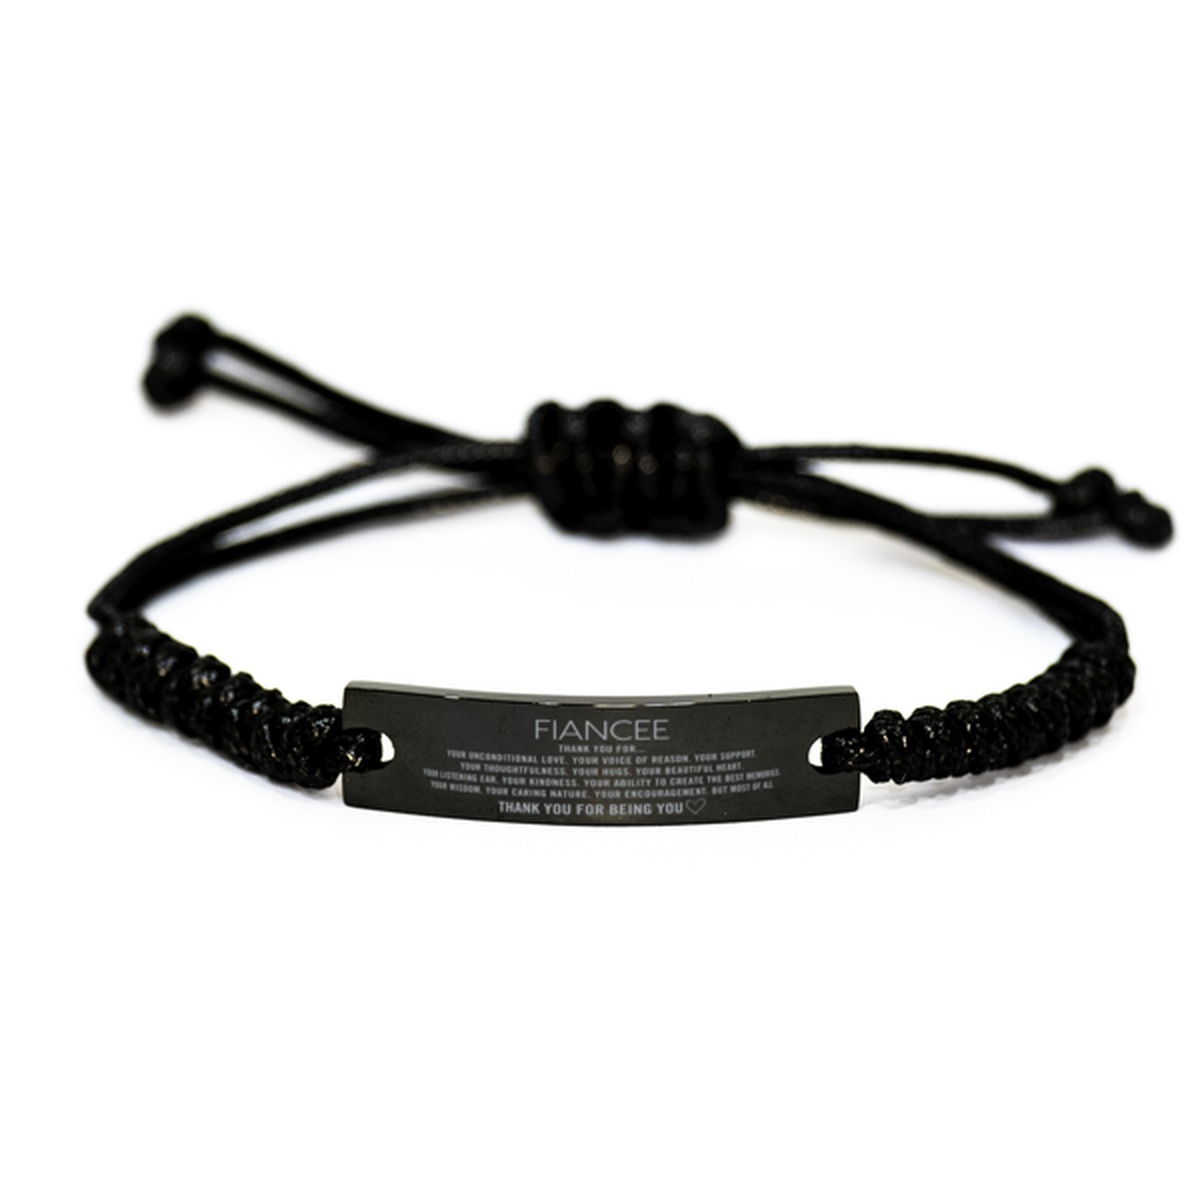 Fiancee Black Rope Bracelet Custom, Engraved Gifts For Fiancee Christmas Graduation Birthday Gifts for Men Women Fiancee Thank you for Your unconditional love